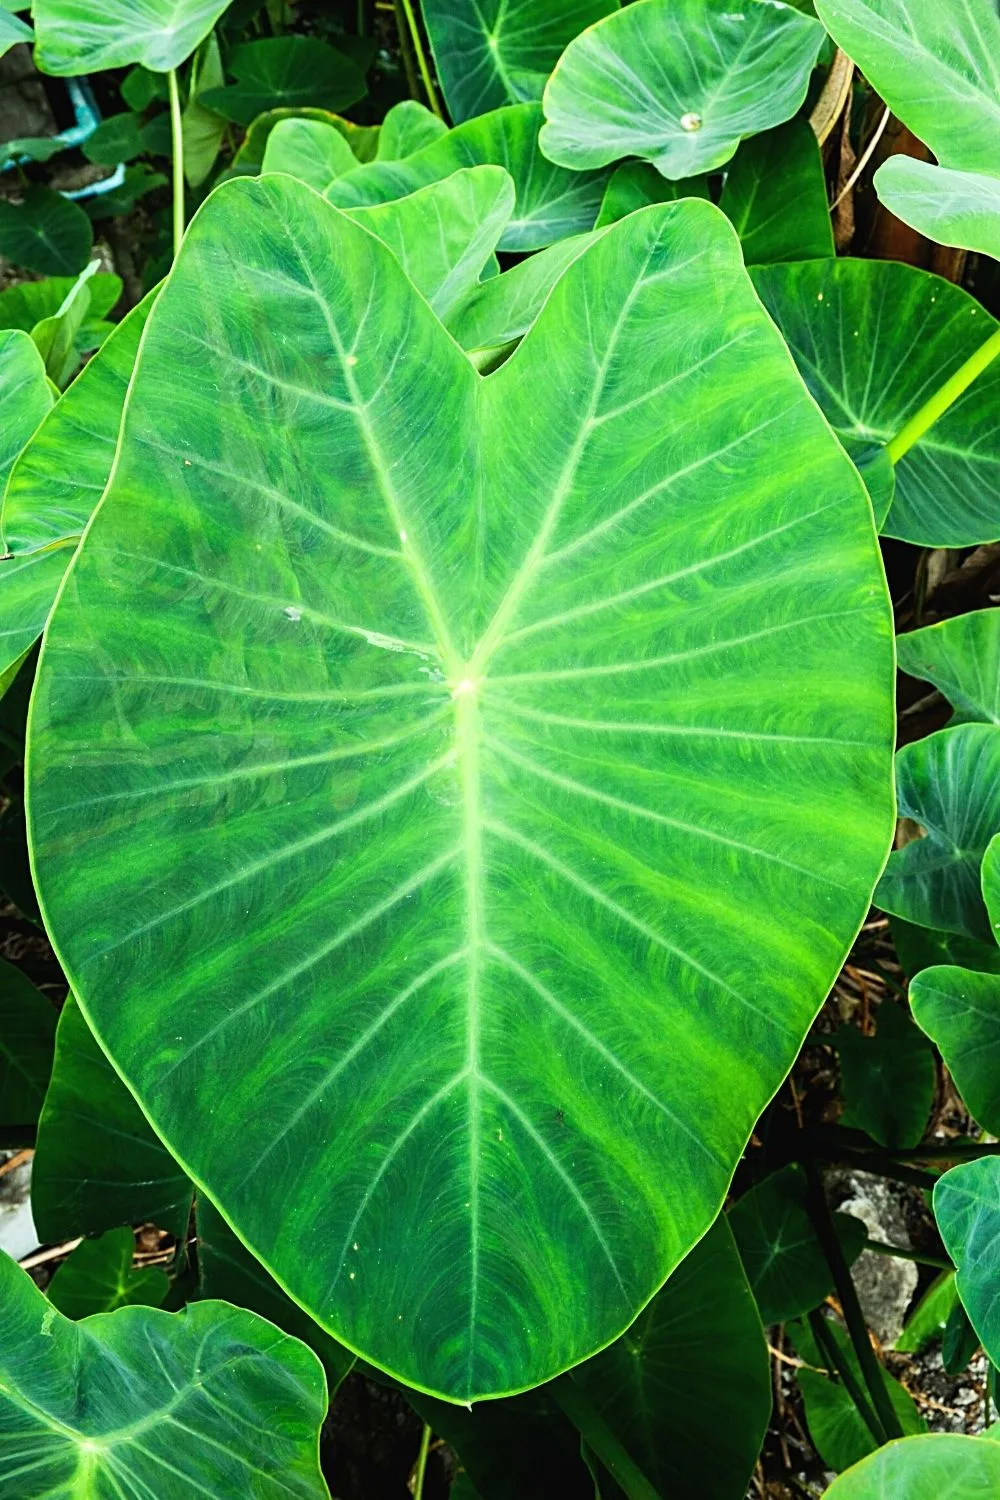 Though Colocasia is a flowering plant, it's commonly grown on west-facing balconies due to its large green leaves